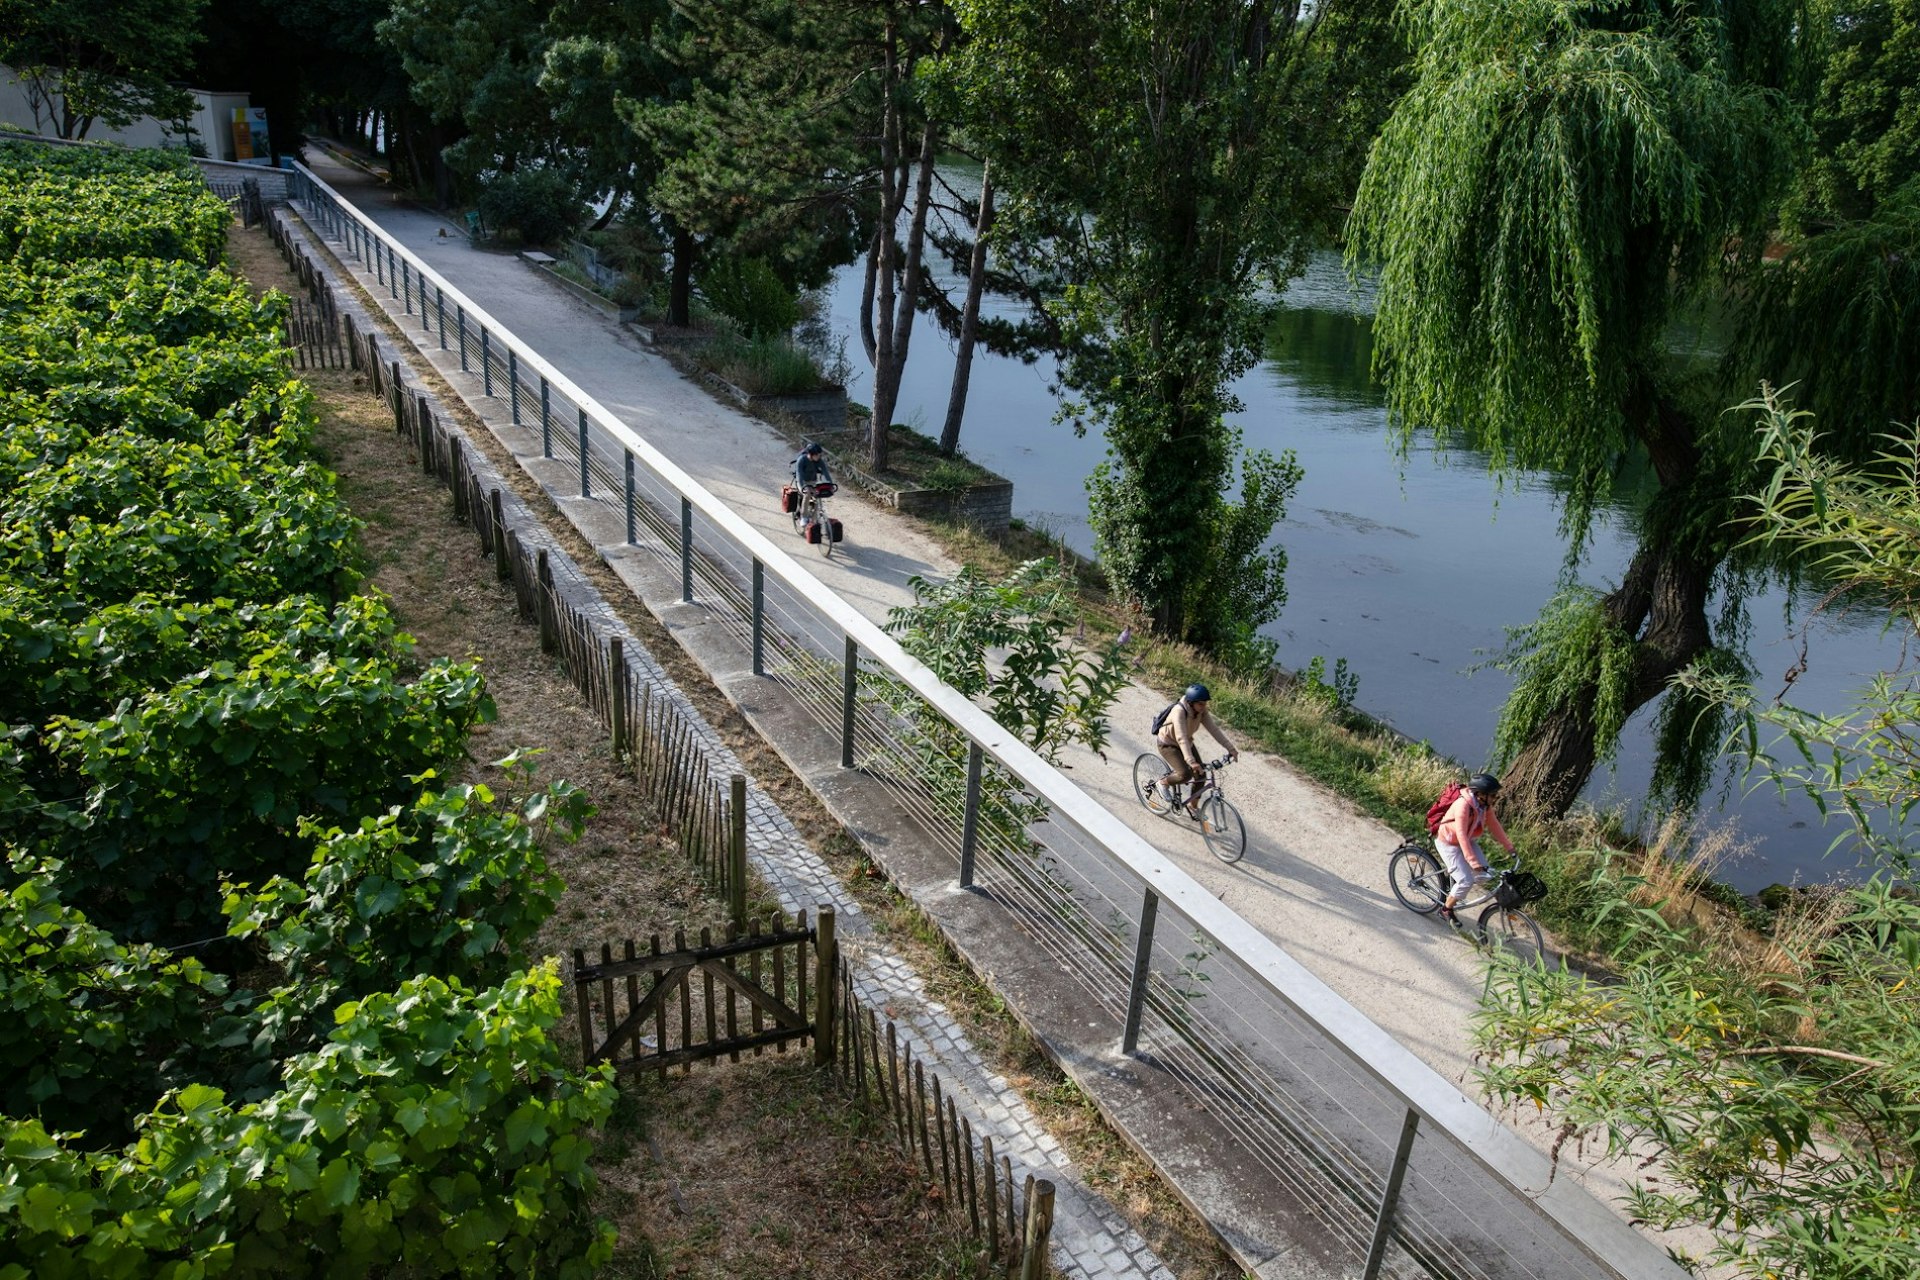 Cyclists riding their bikes in France